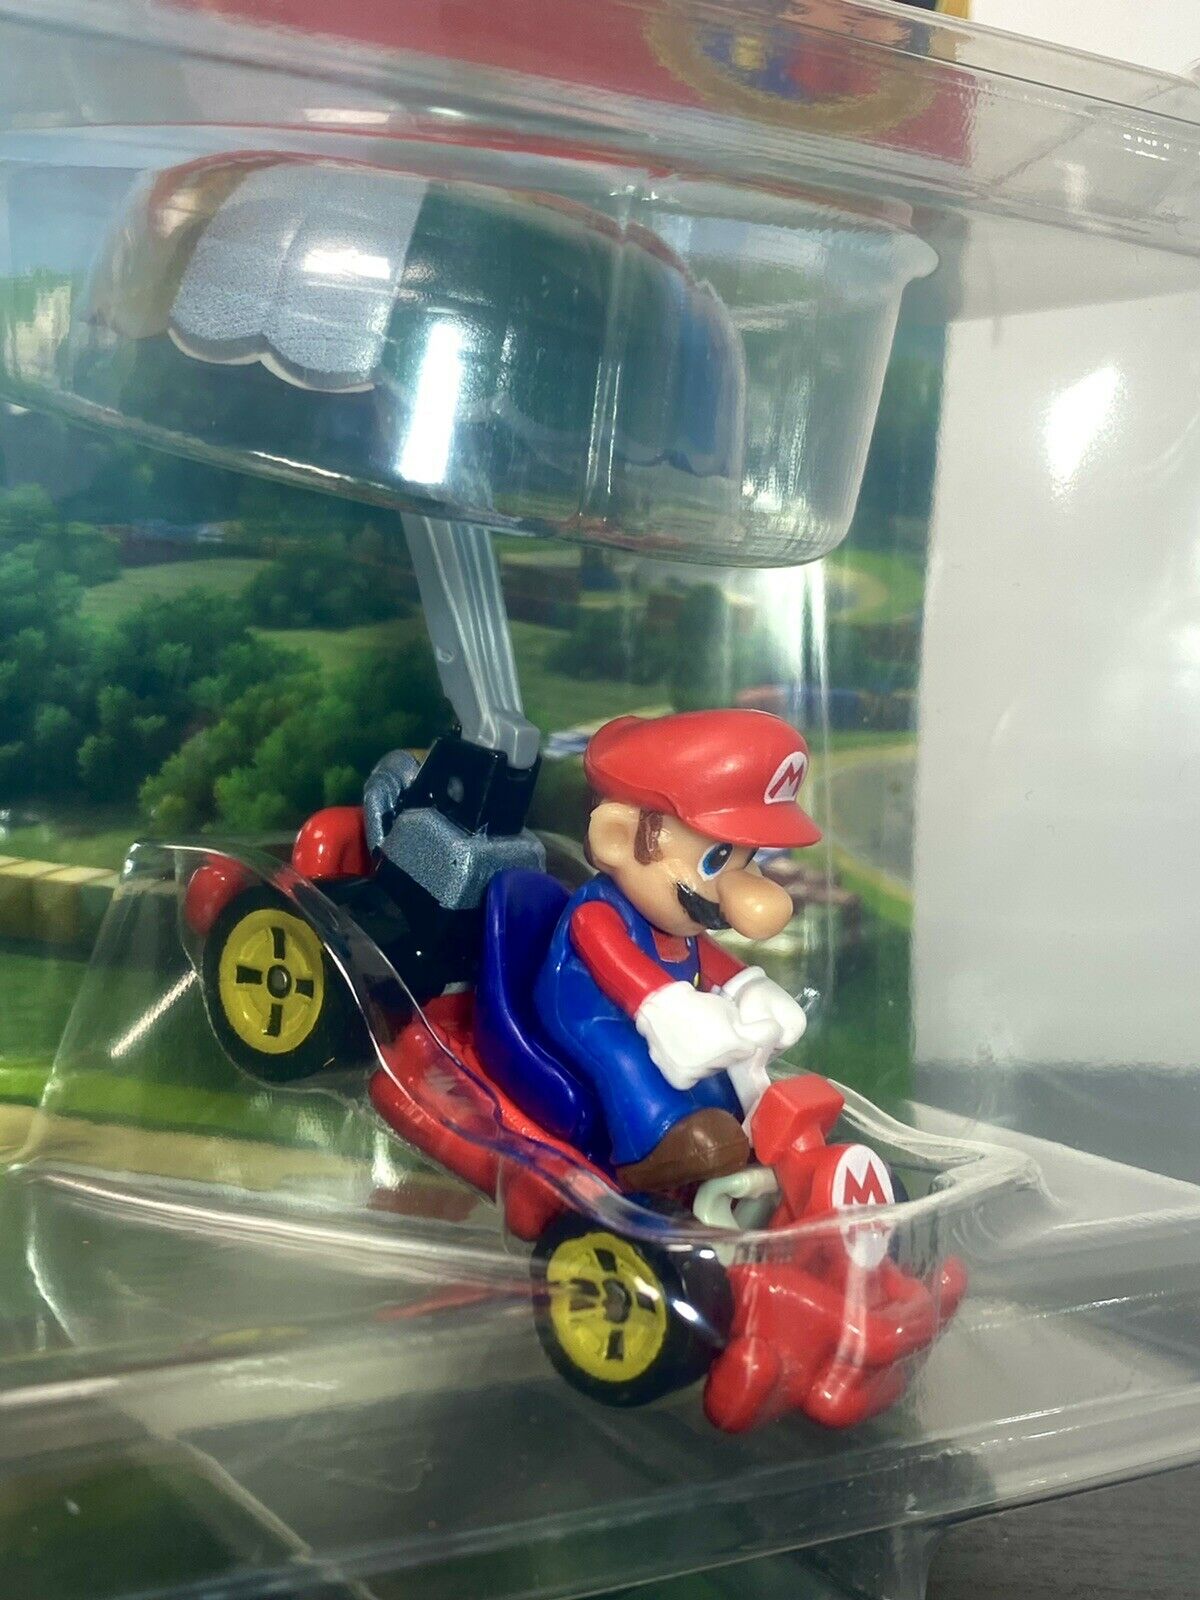 Mario Kart Hot Wheels Mario With Pipe Frame and Parachute